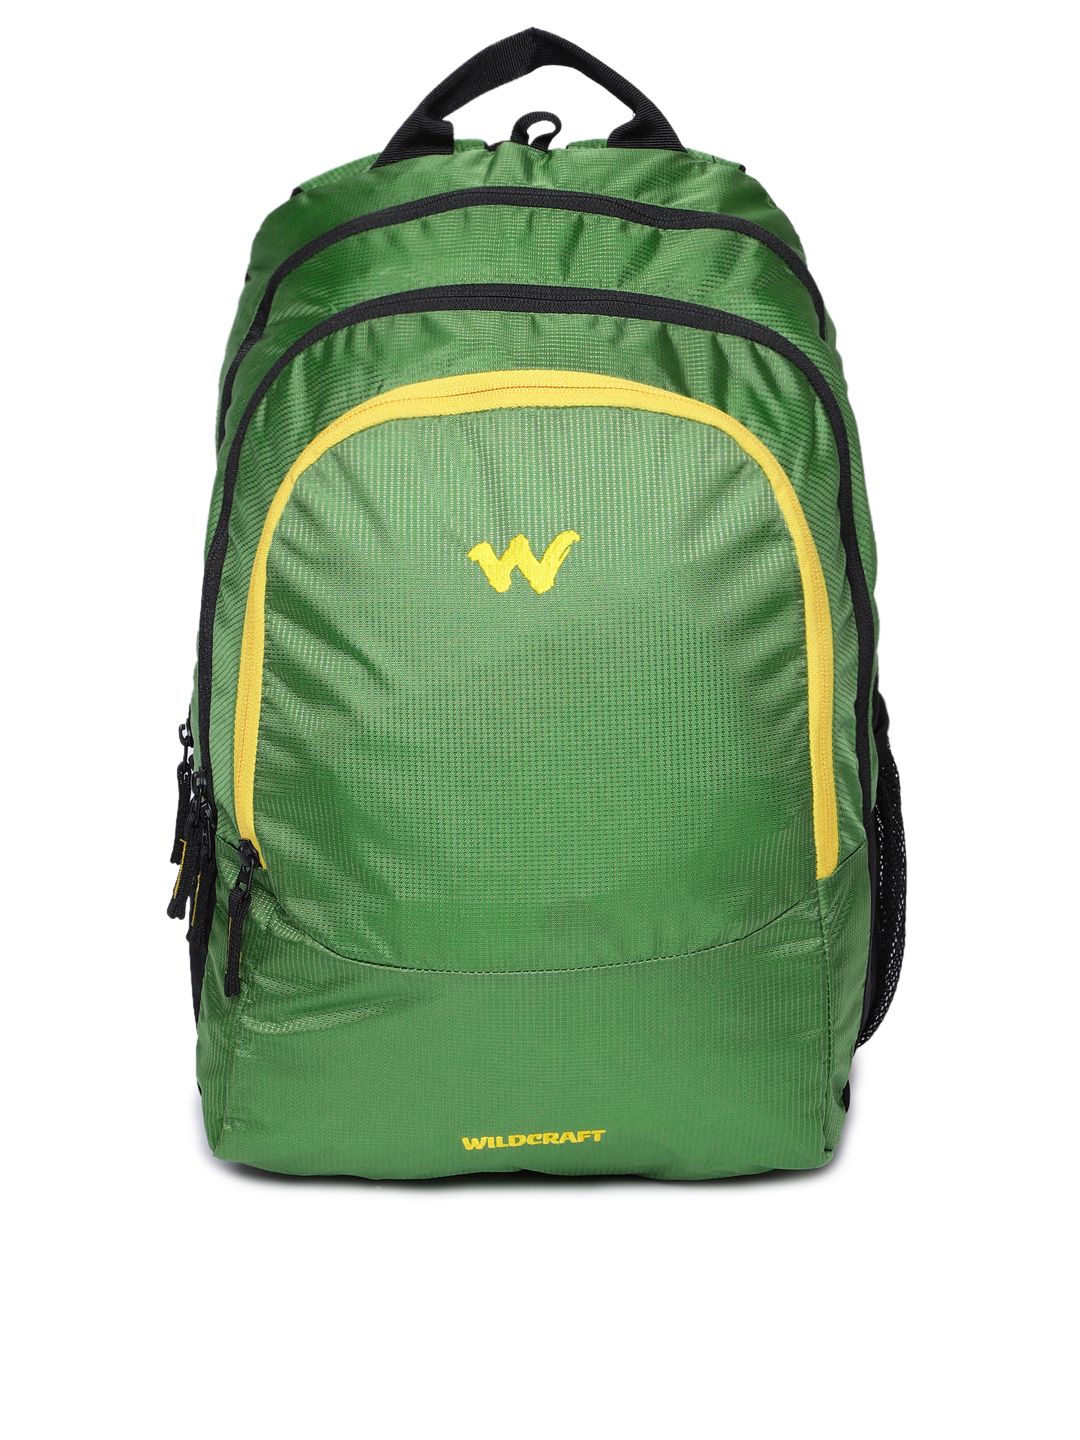 Wildcraft Unisex Green Solid Backpack Price in India